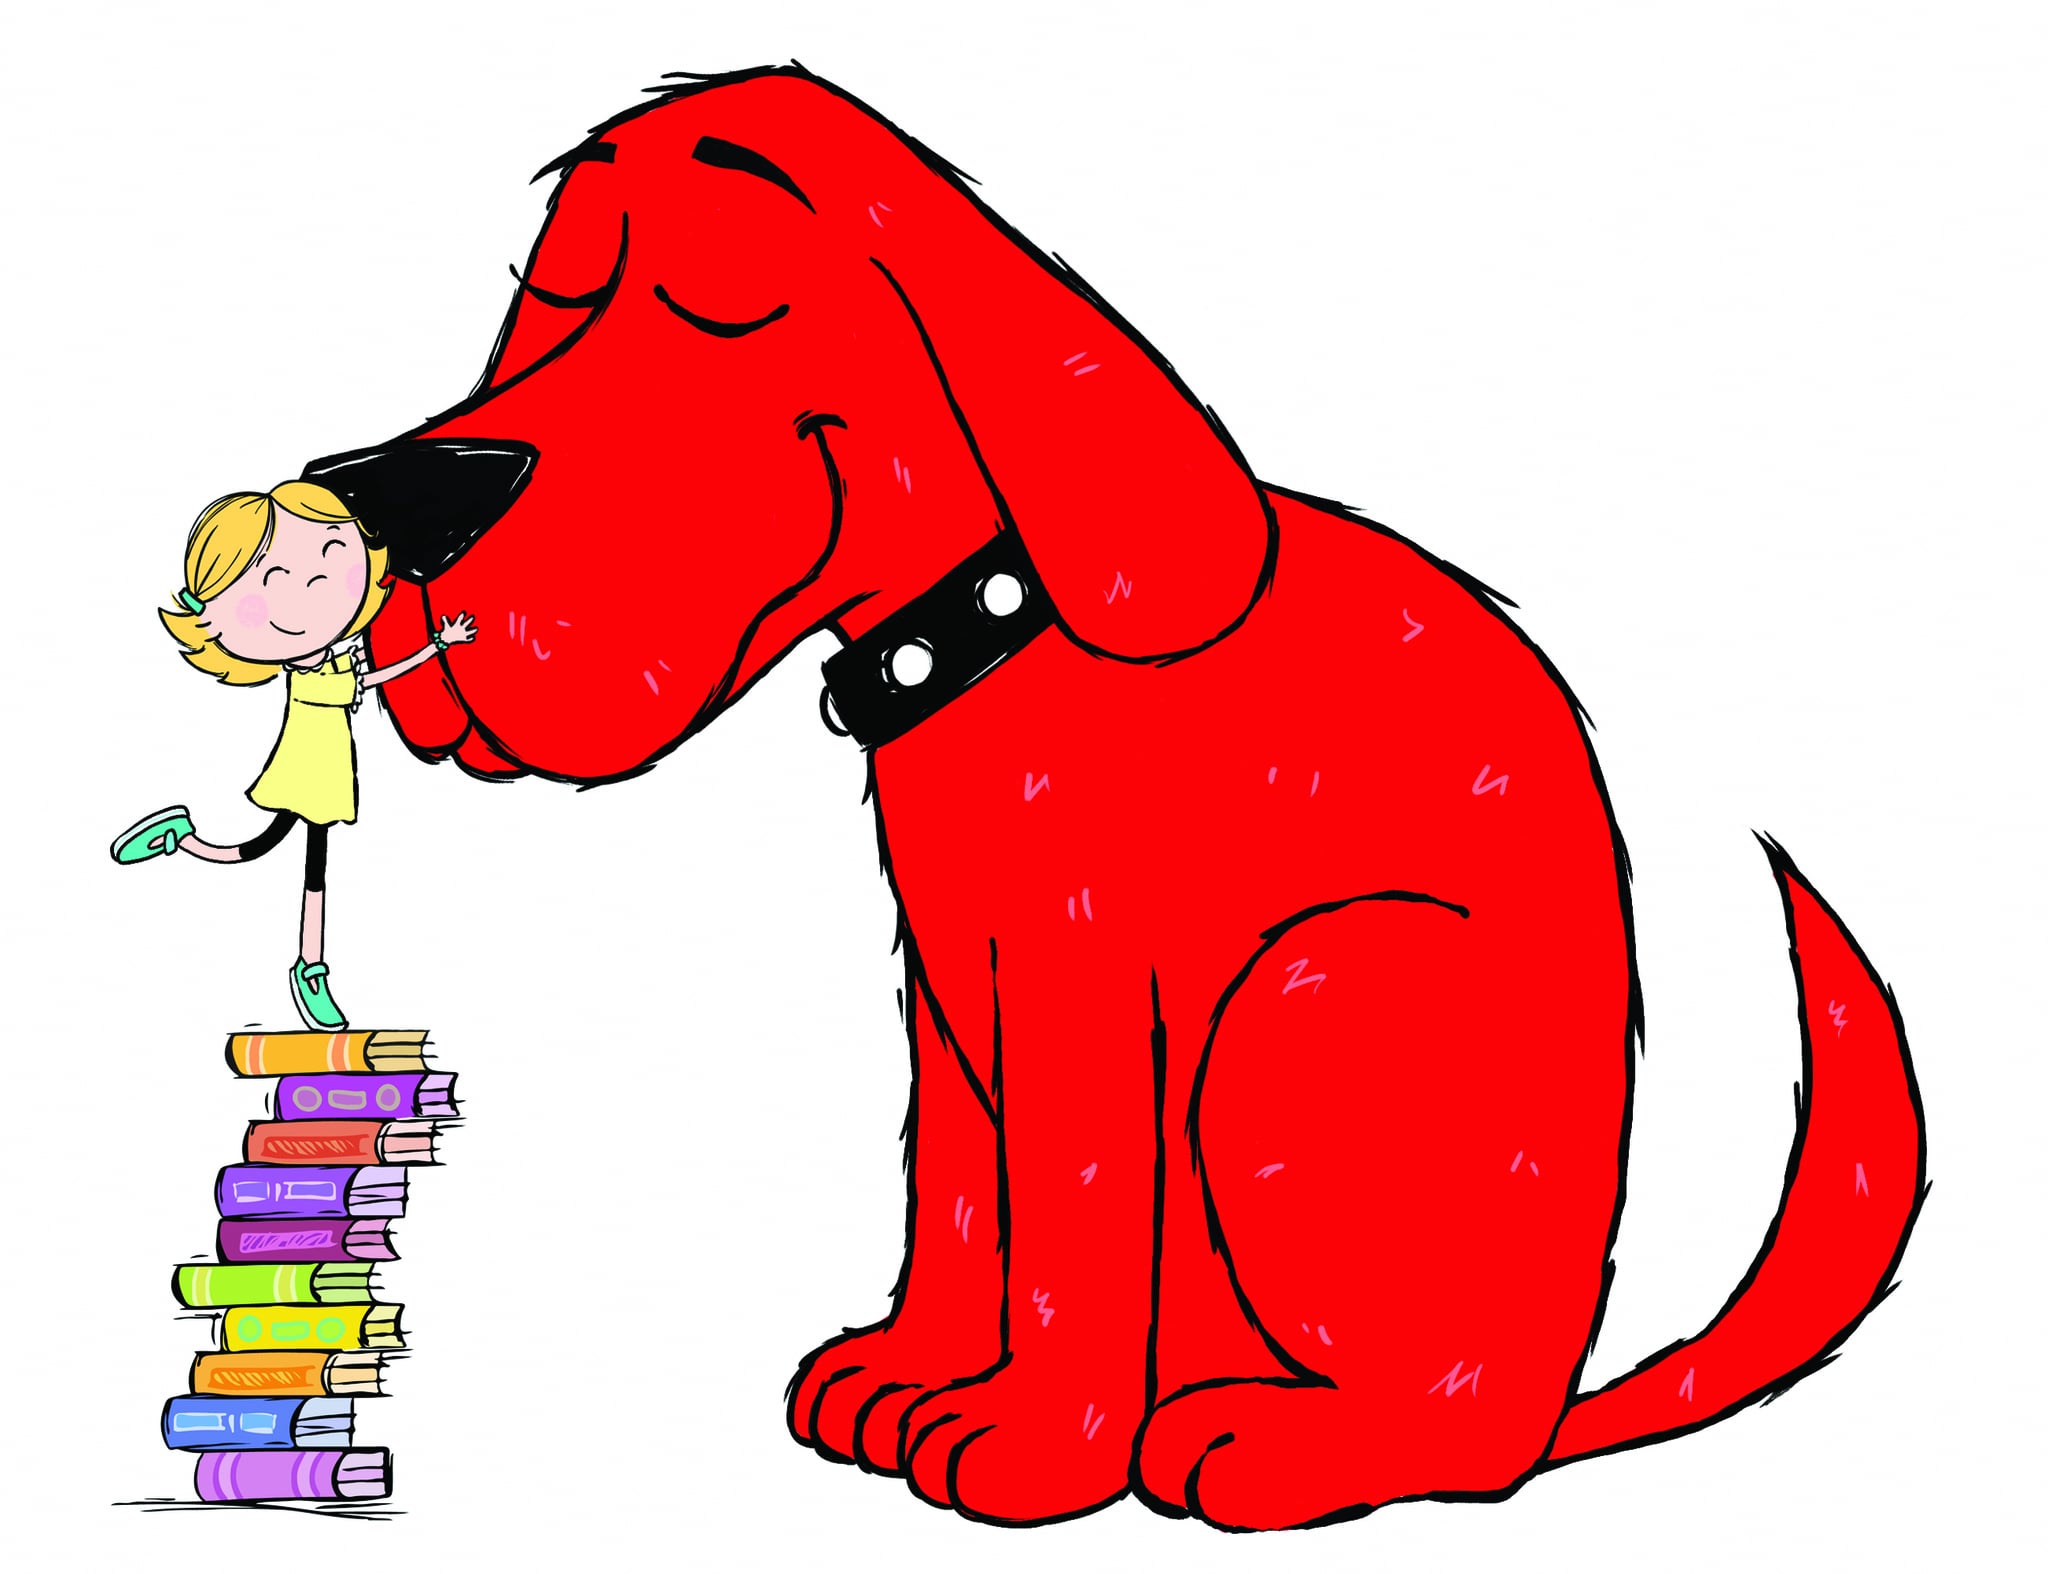 clifford-the-big-red-dog-tv-series-2000-2003